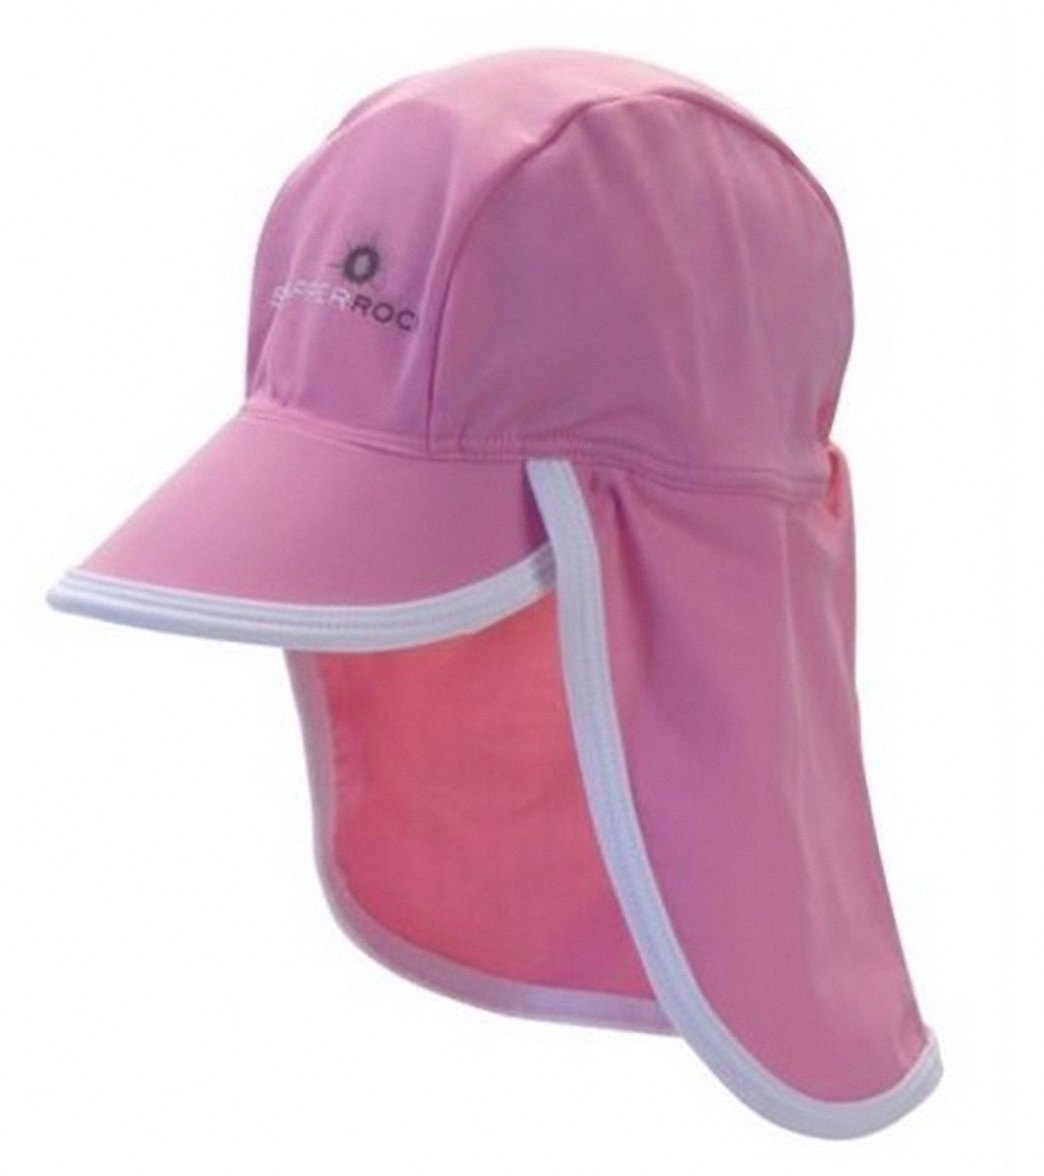 Snapper Rock Baby Girls' Pink/White Flap Hat Kids - One Size 0-2Yrs - Swimoutlet.com